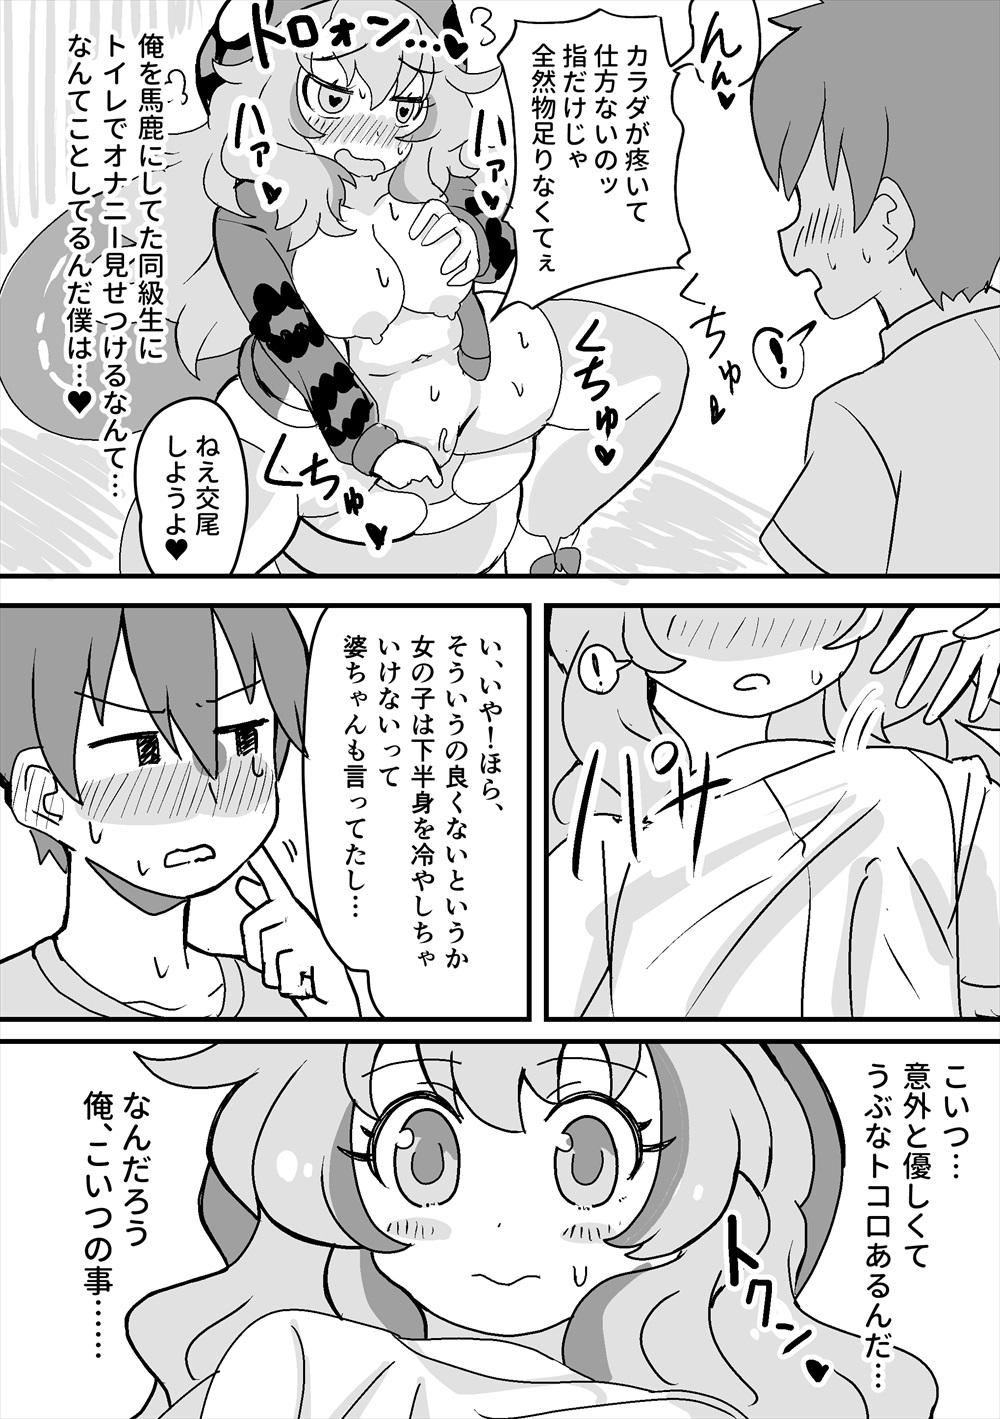 Free Fuck 男の子が一皮むけるお話 Roleplay - Page 6